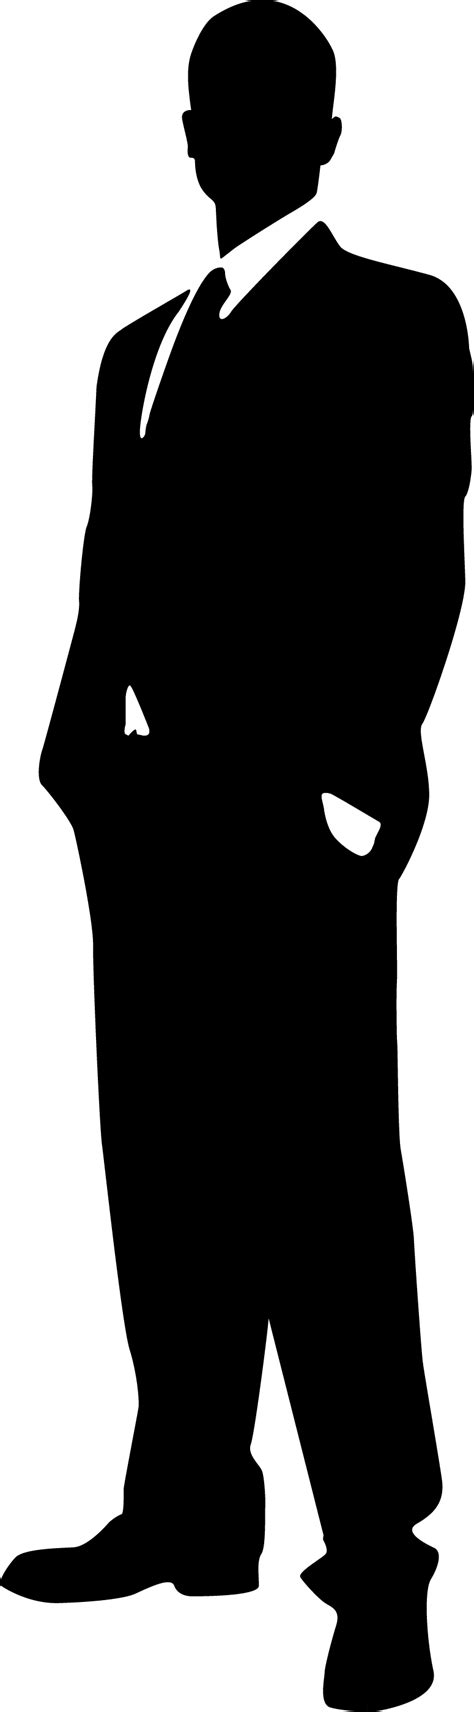 Unknown Person Silhouette At Getdrawings Free Download